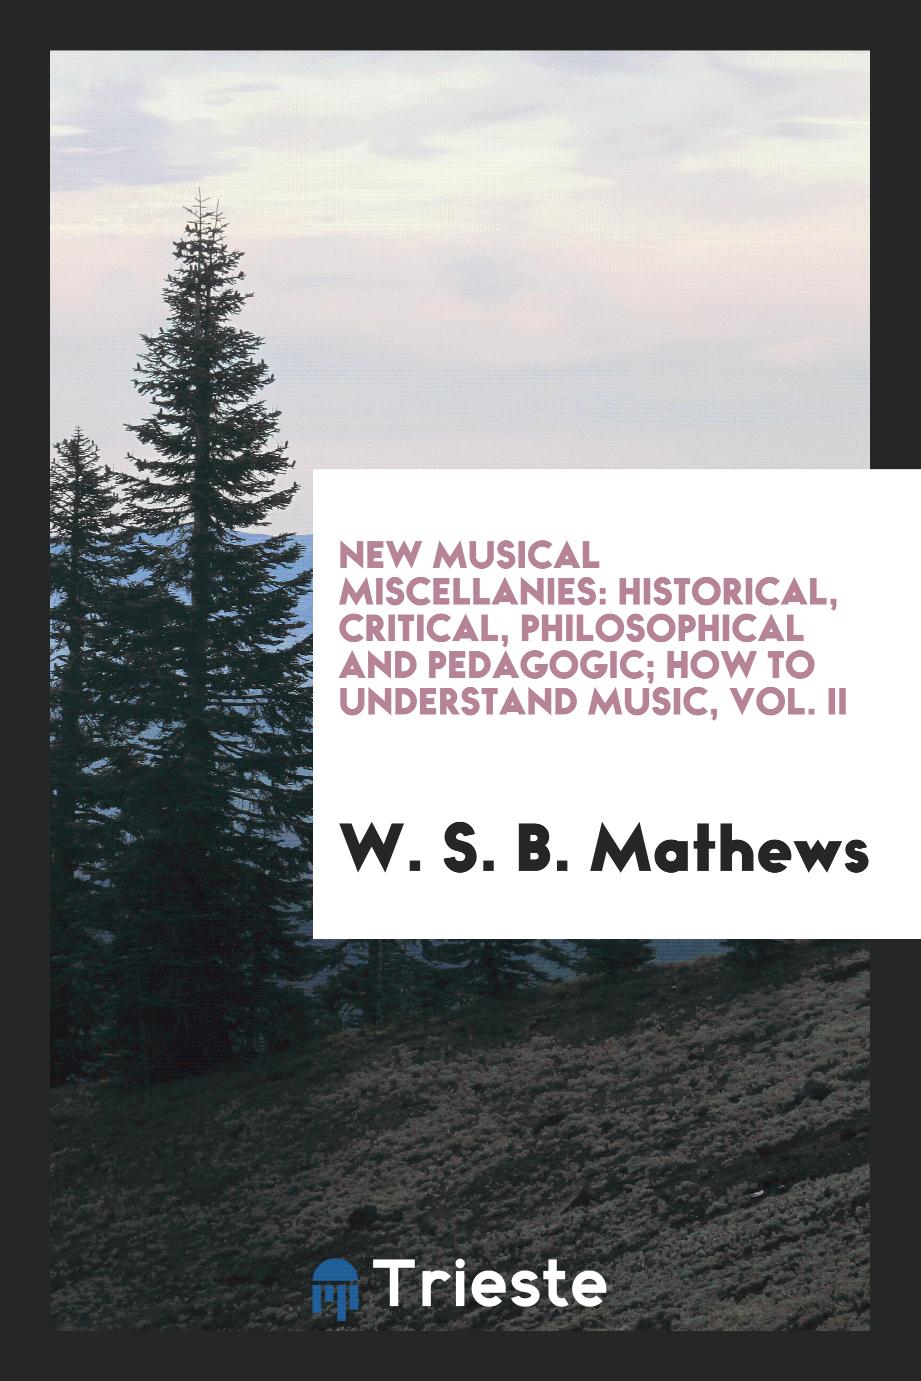 New musical miscellanies: historical, critical, philosophical and pedagogic; How to understand music, Vol. II